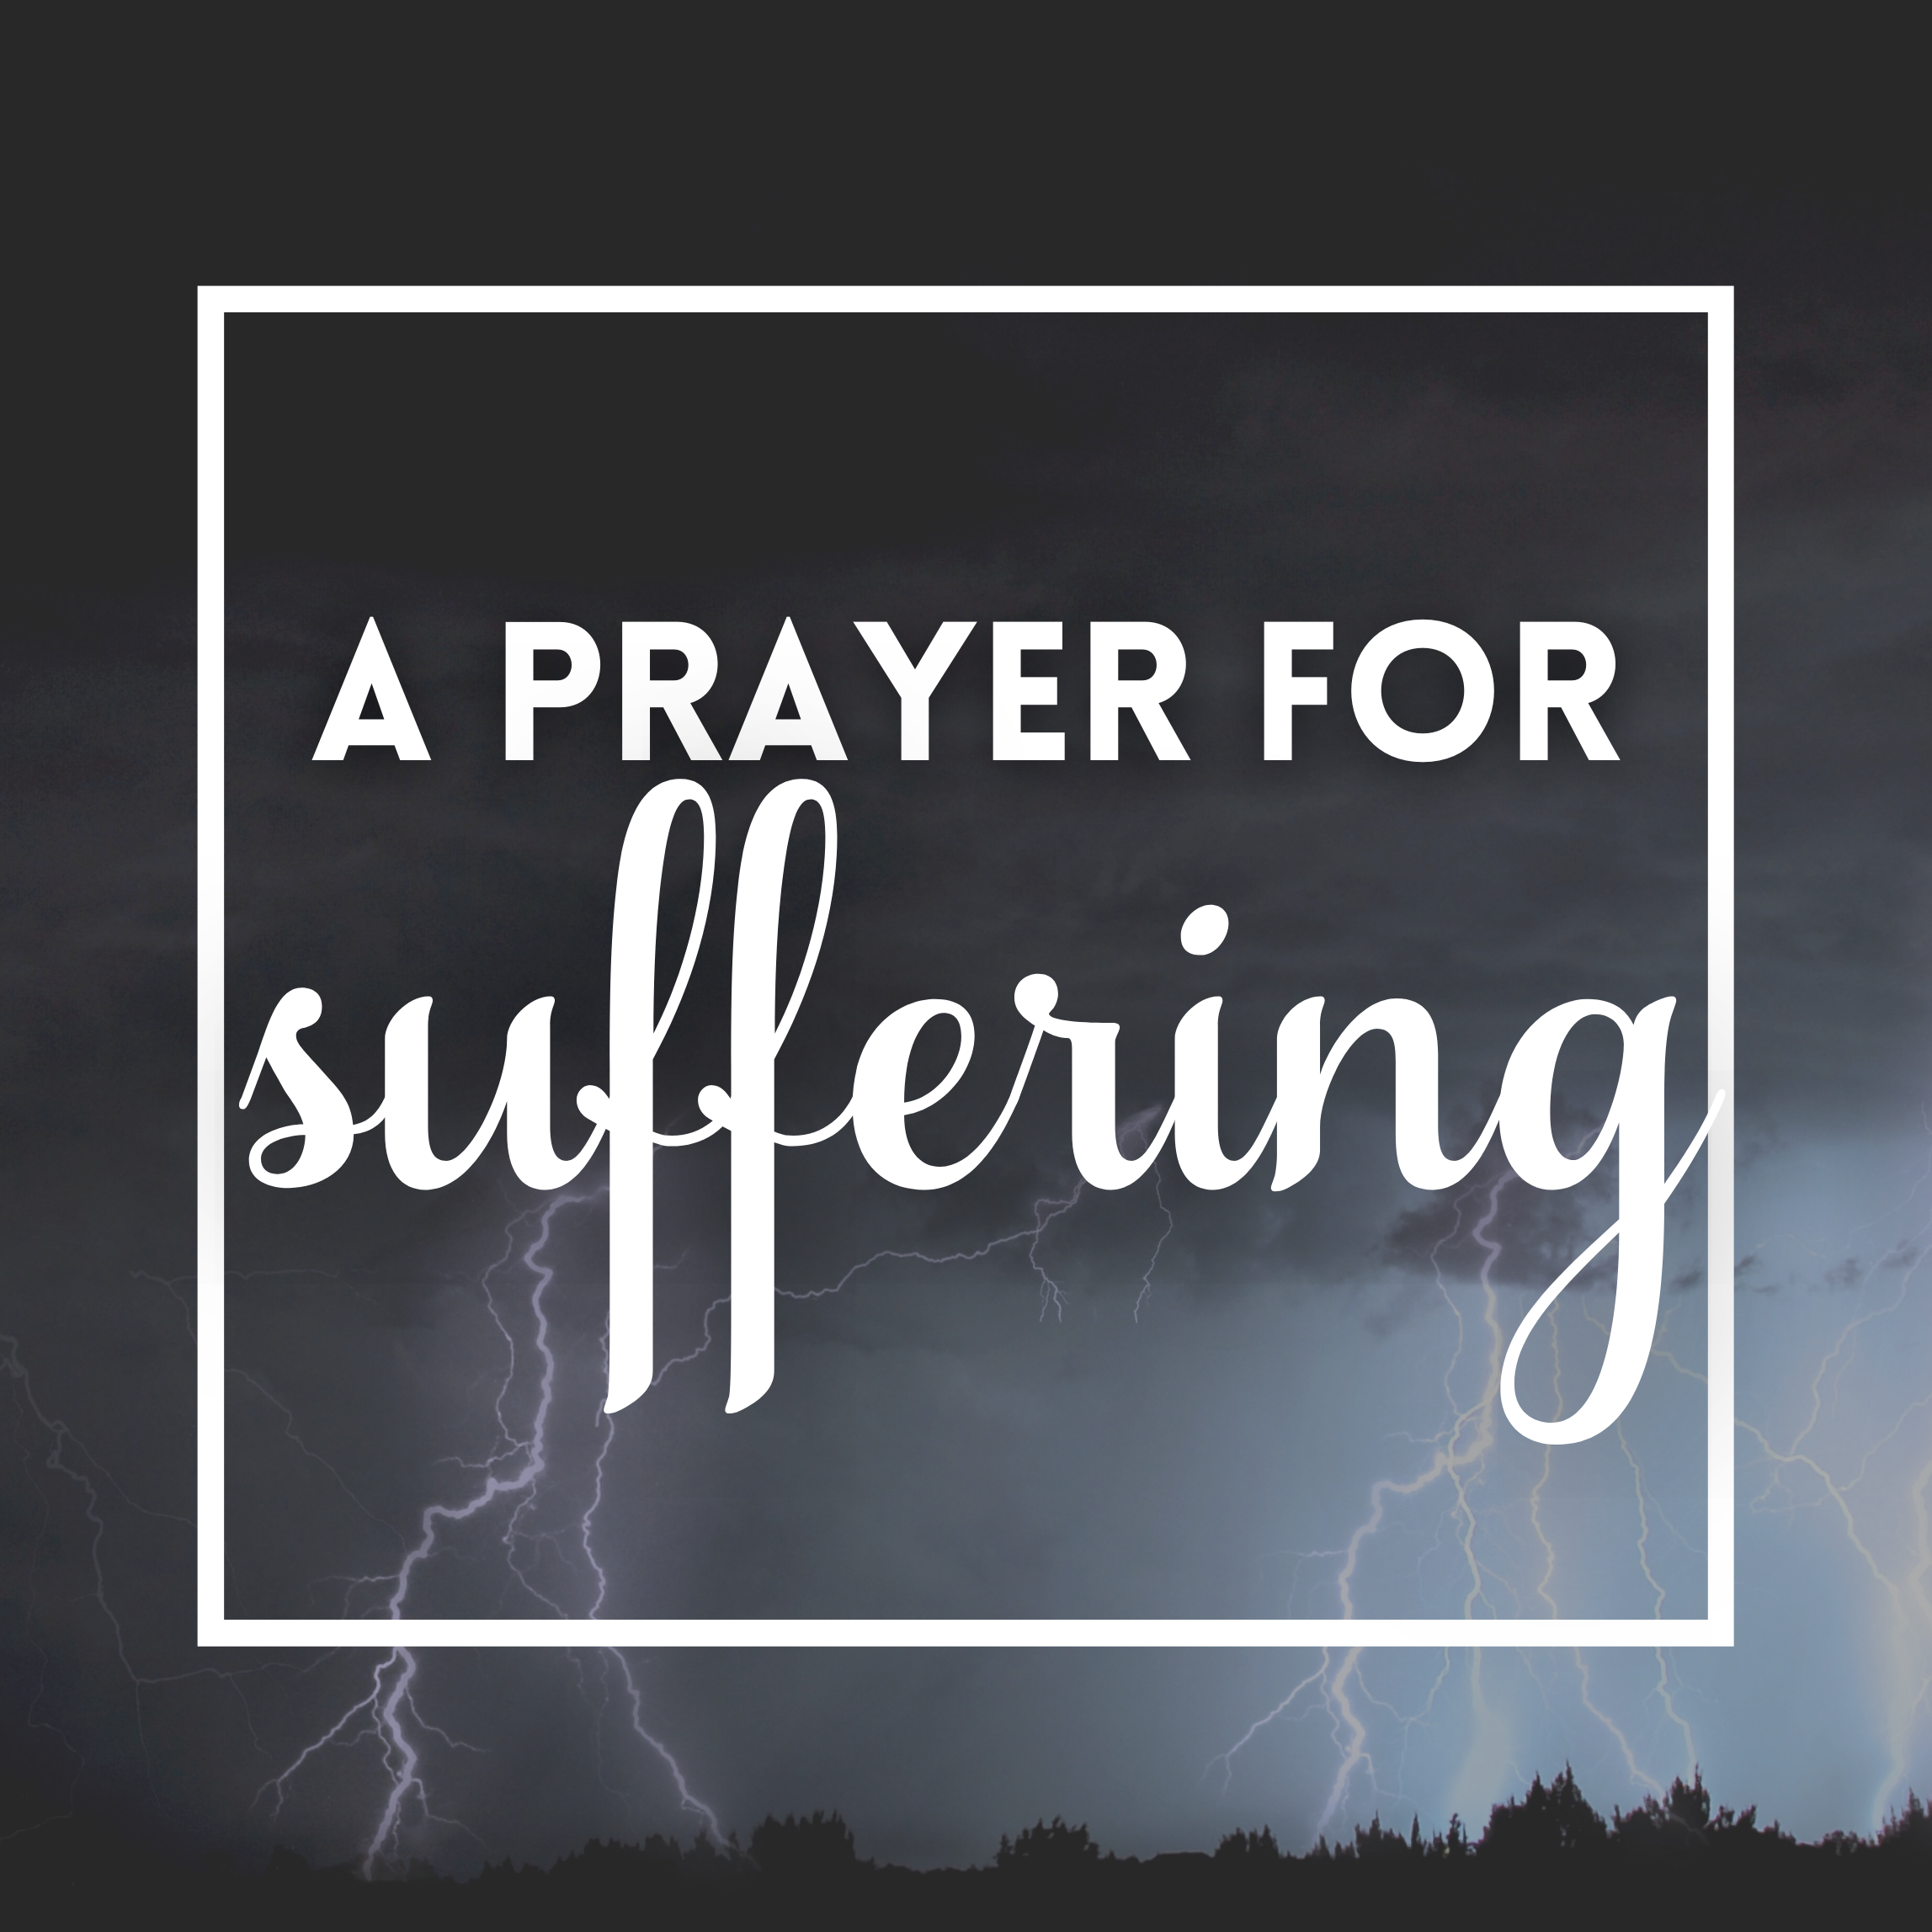 A Prayer for Suffering